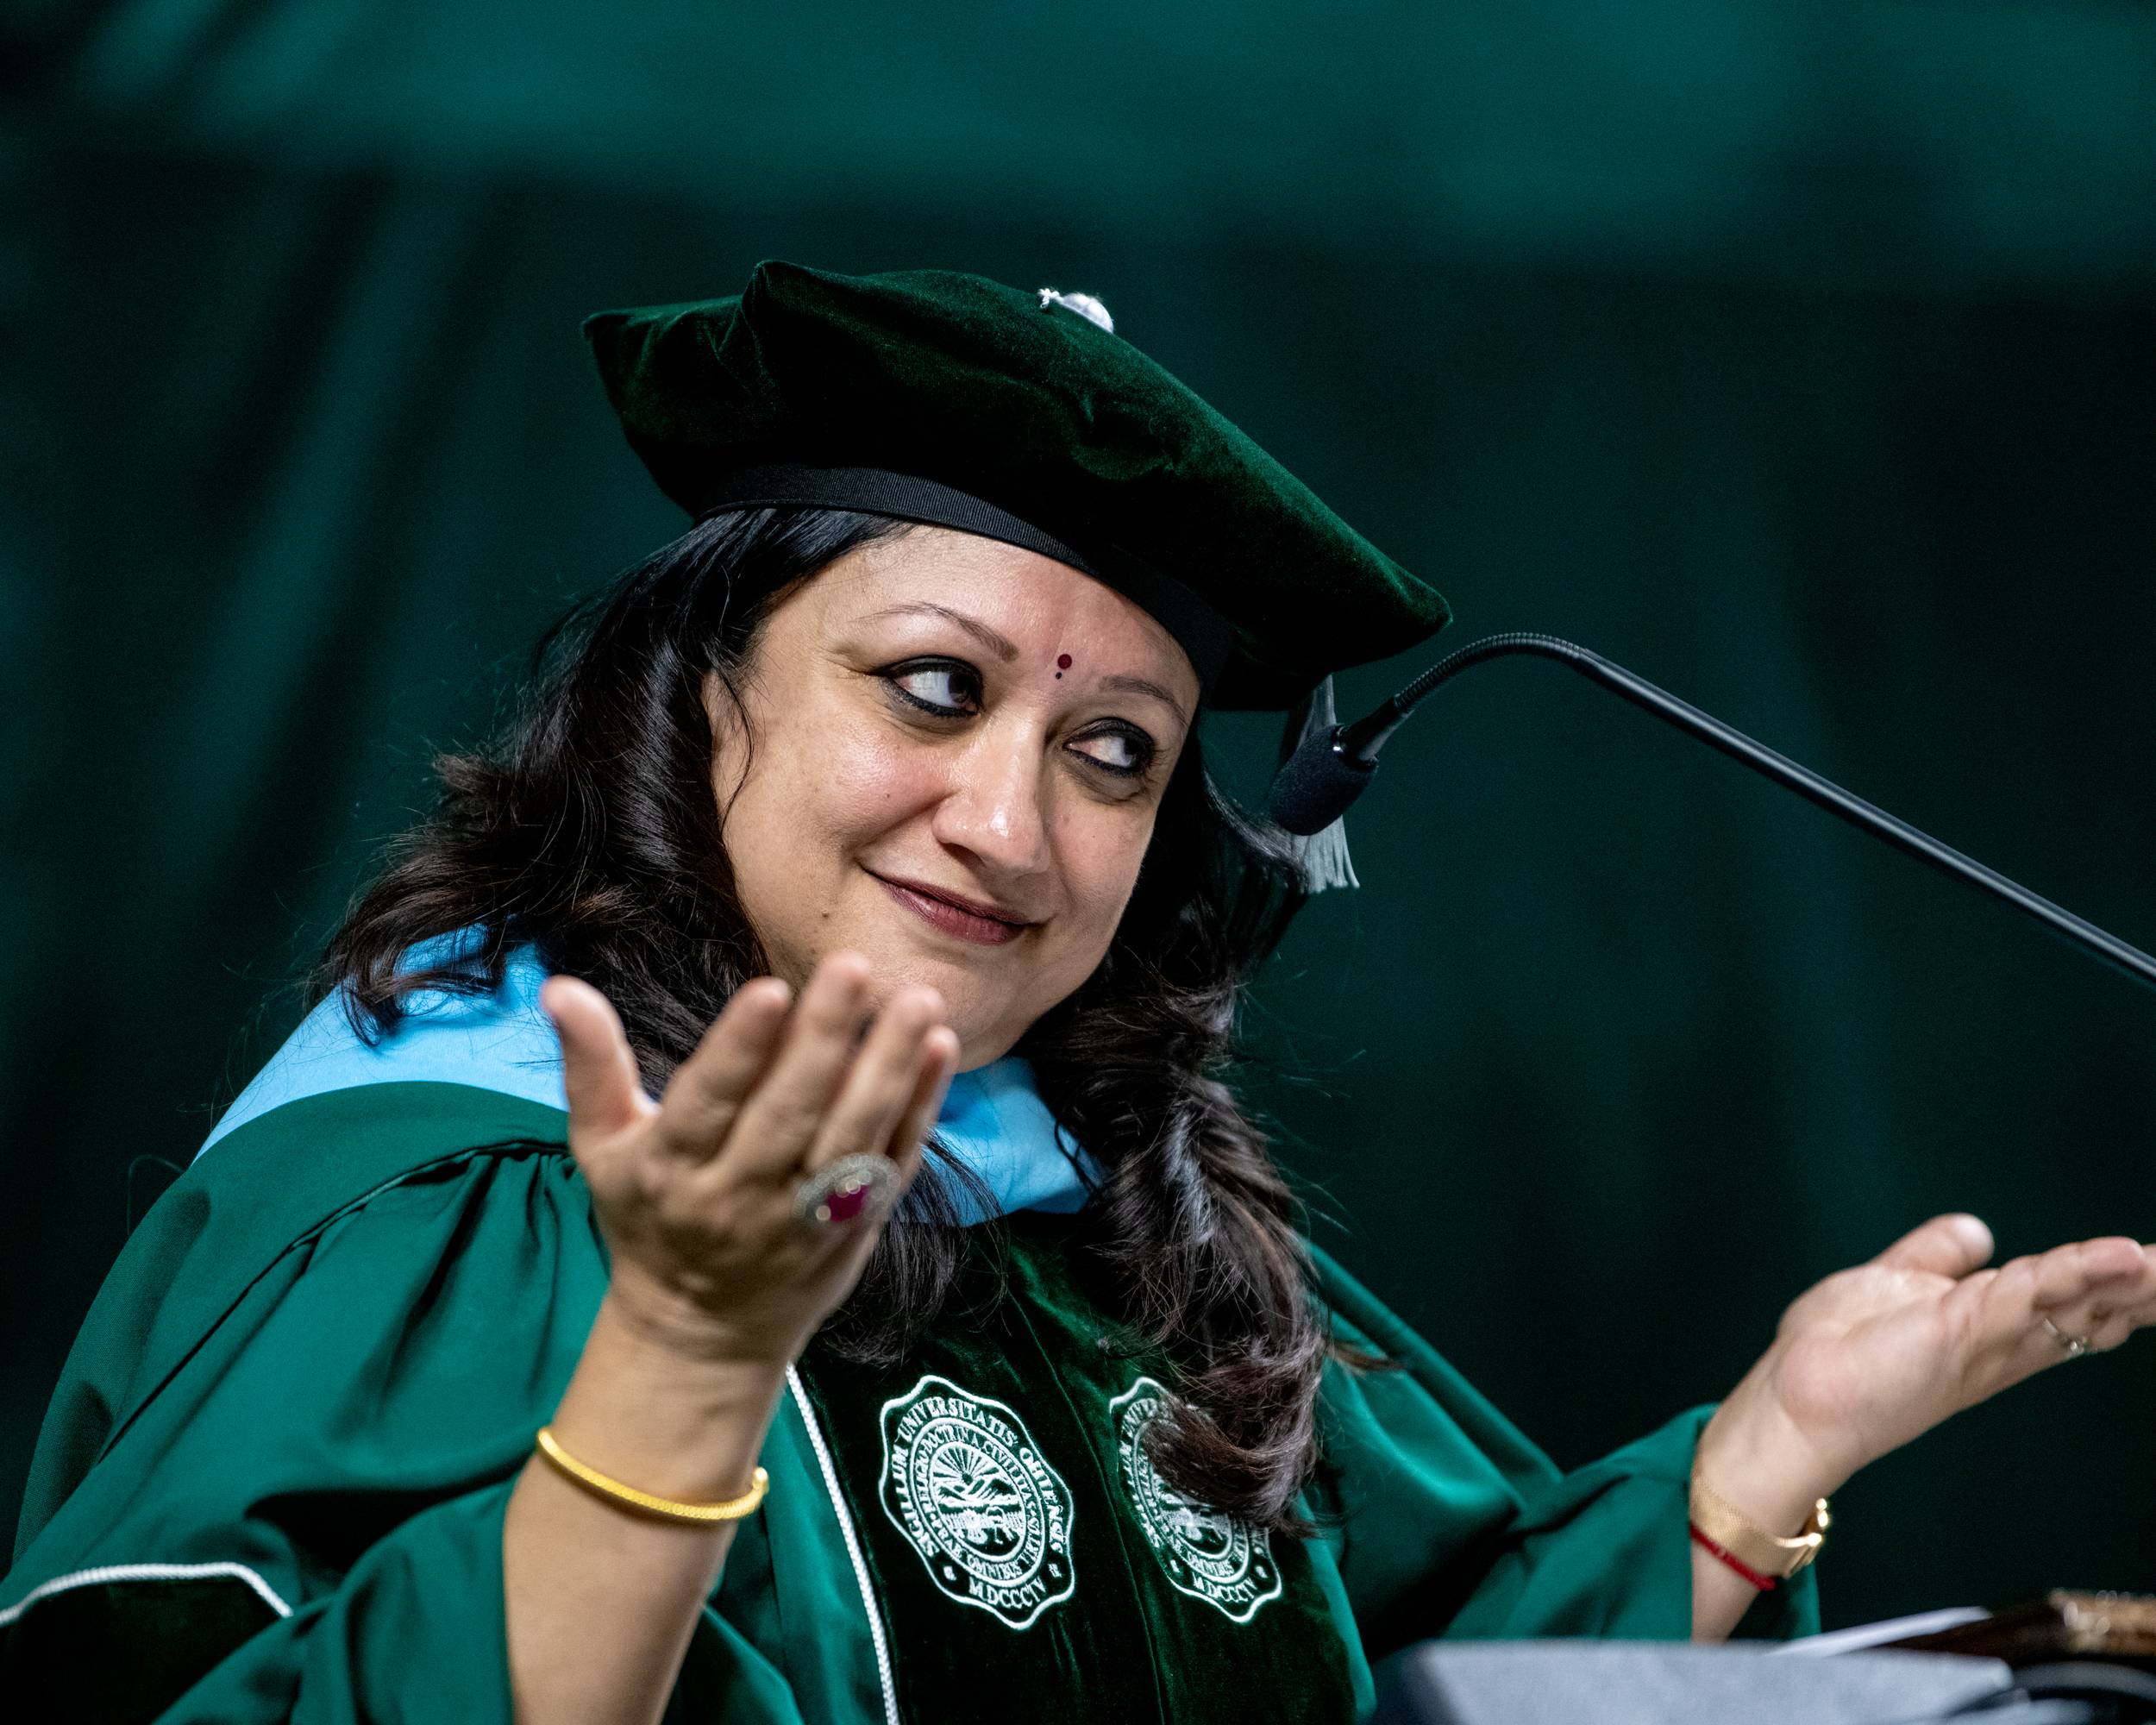 Dr. Saumya Pant, assistant professor in the School of Media Arts and Studies and director of the Communication and Development Studies program in the Center for International Studies, delivers the commencement address to graduate students on Friday, May 5.